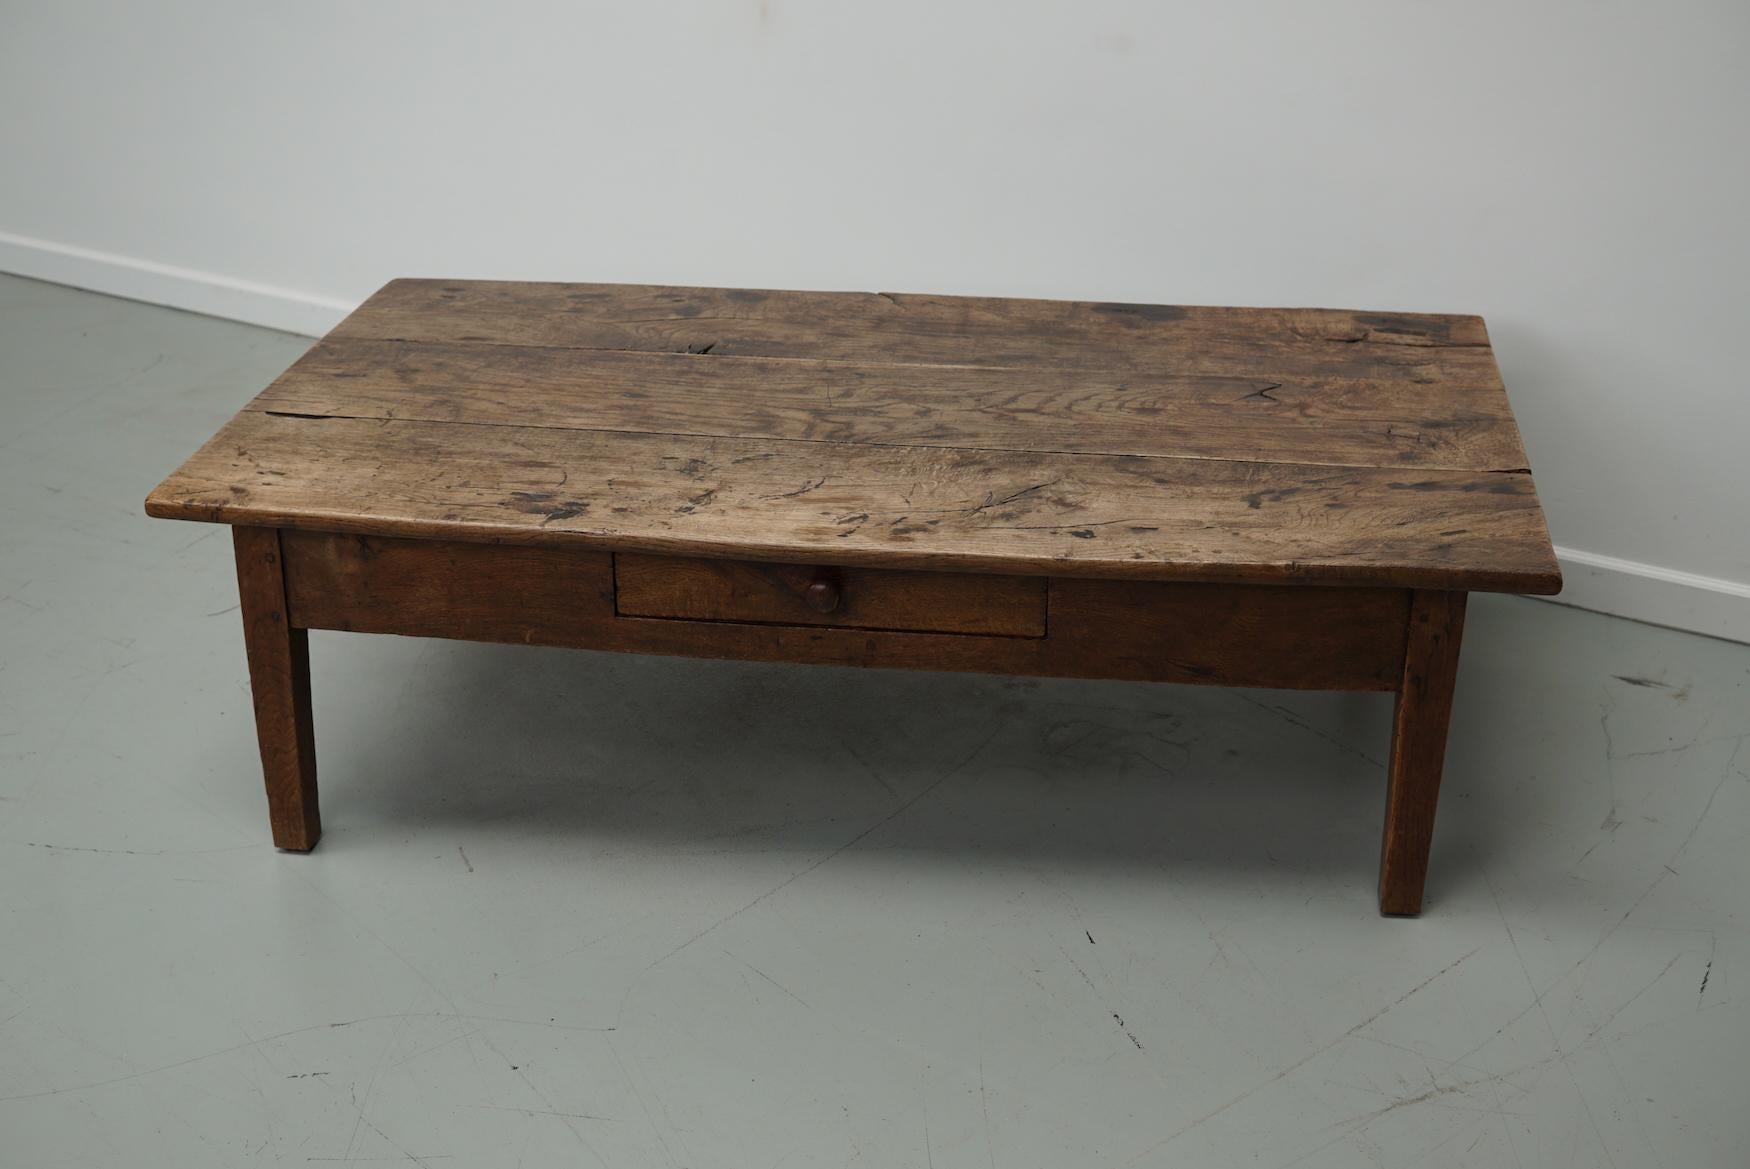 This coffee table was converted from an old 19th century chestnut farmhouse kitchen table. It retained a very nice patina and rich color / fading over the years and has a practical size.